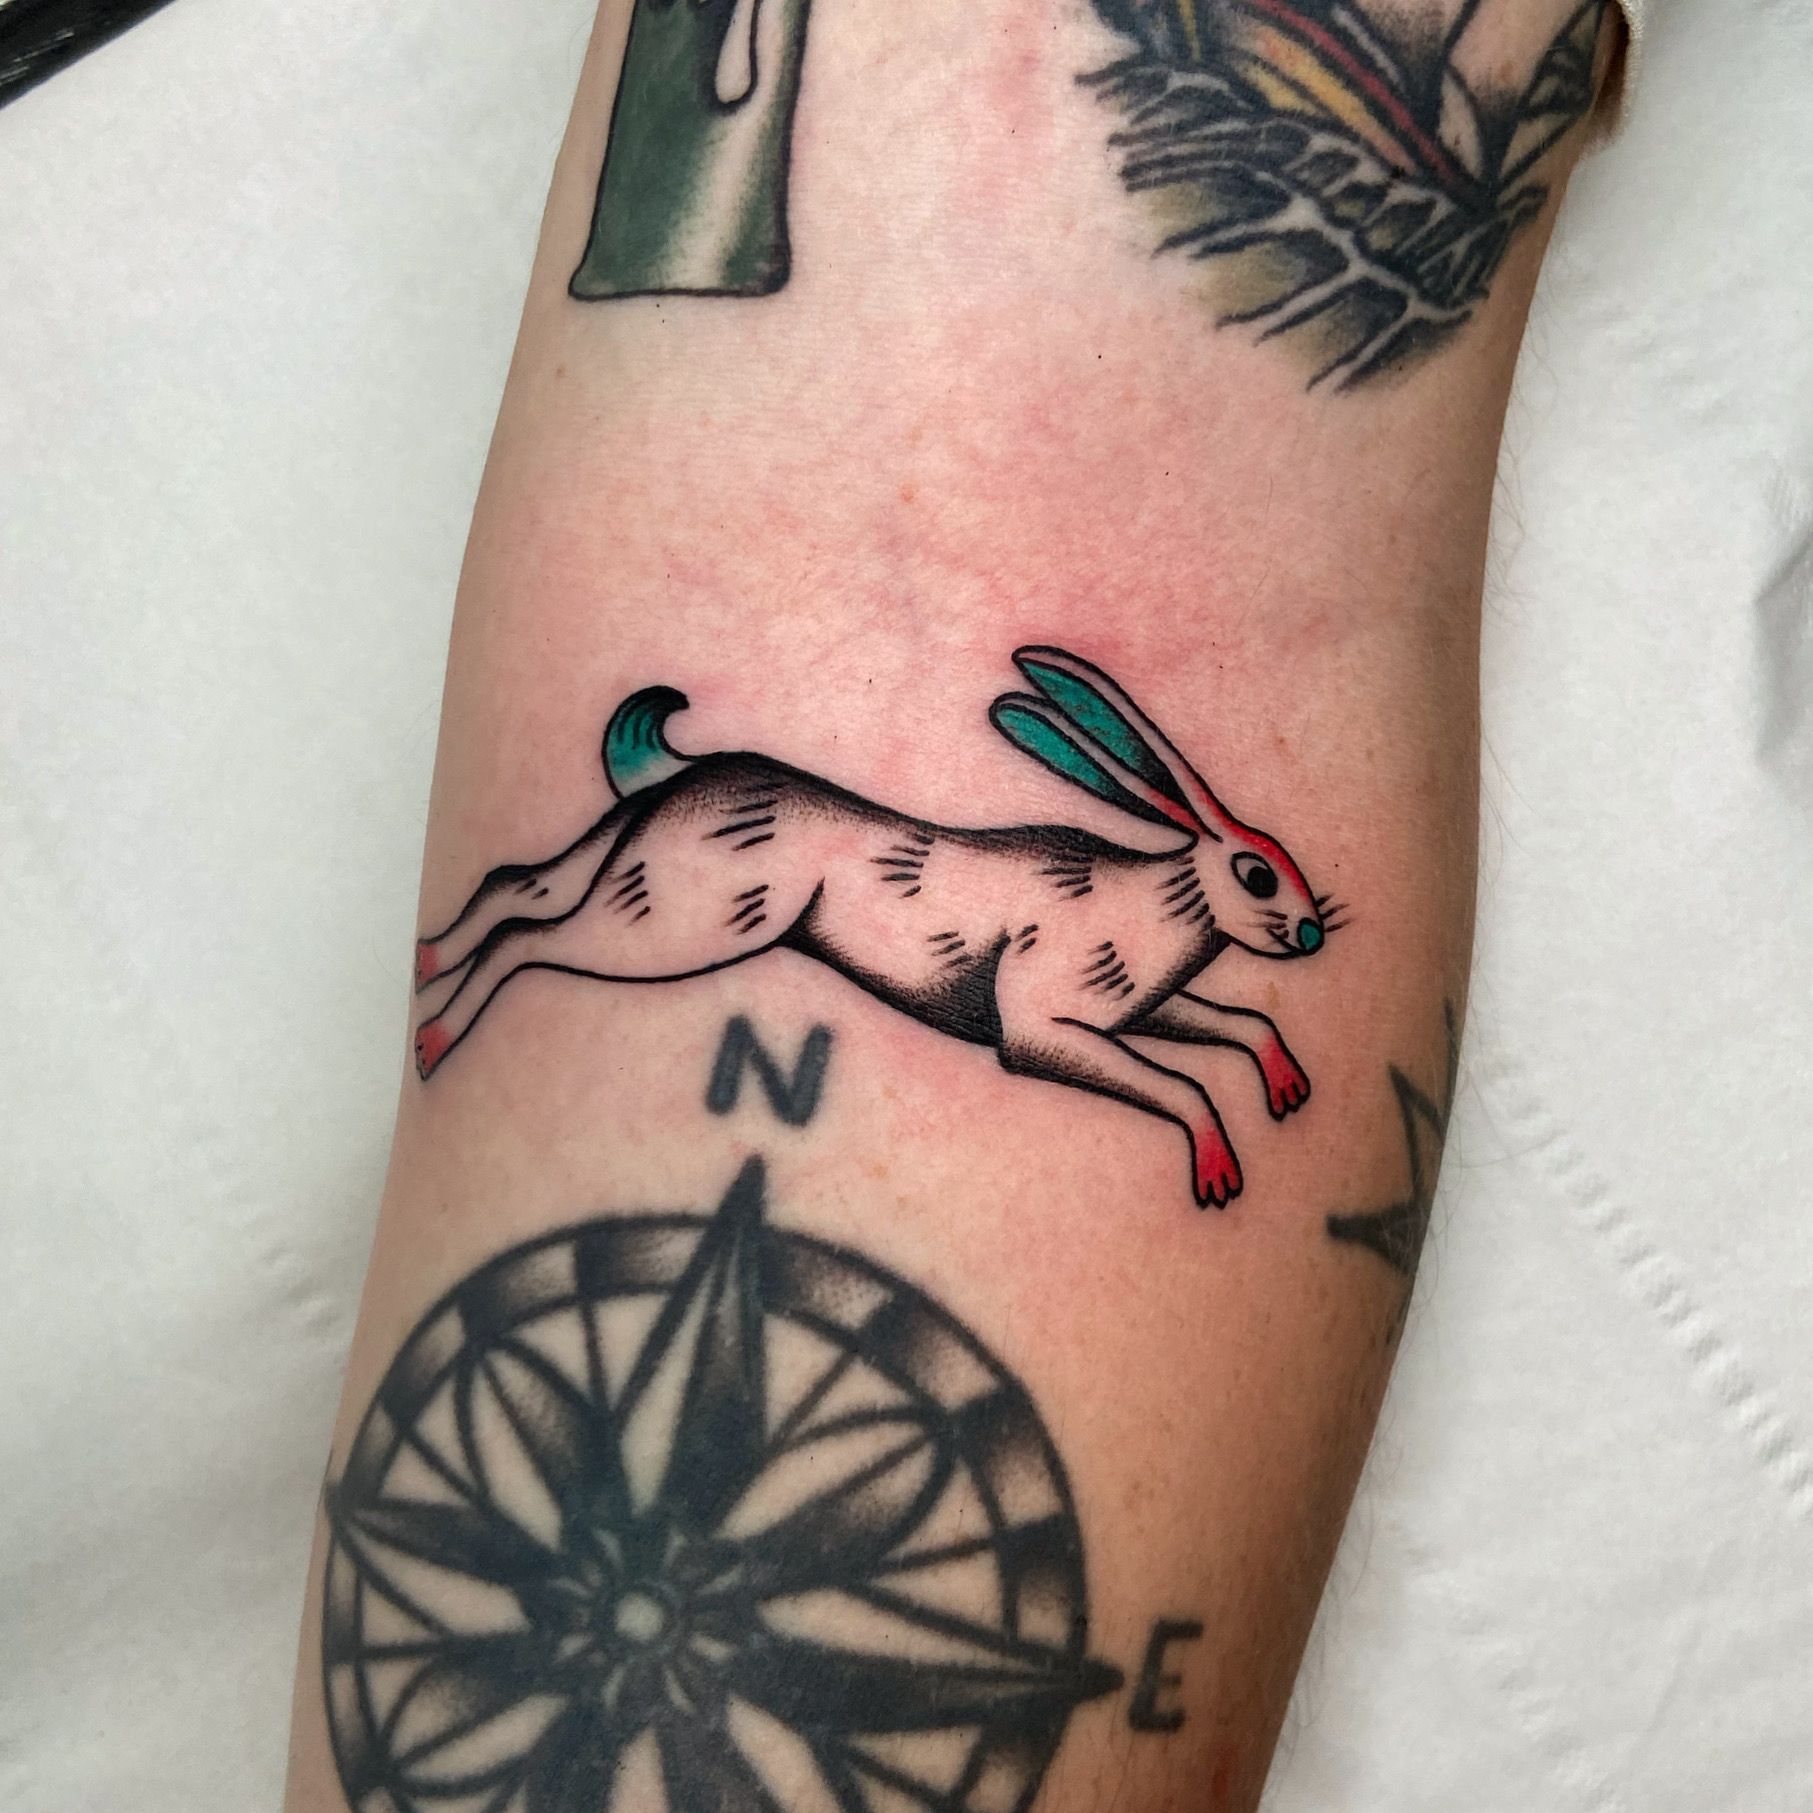 Hare that I just had done this week by Dustin Stemen, Black Anvil, Fort  Wayne, IN. Extremely happy with how it turned out. : r/tattoos